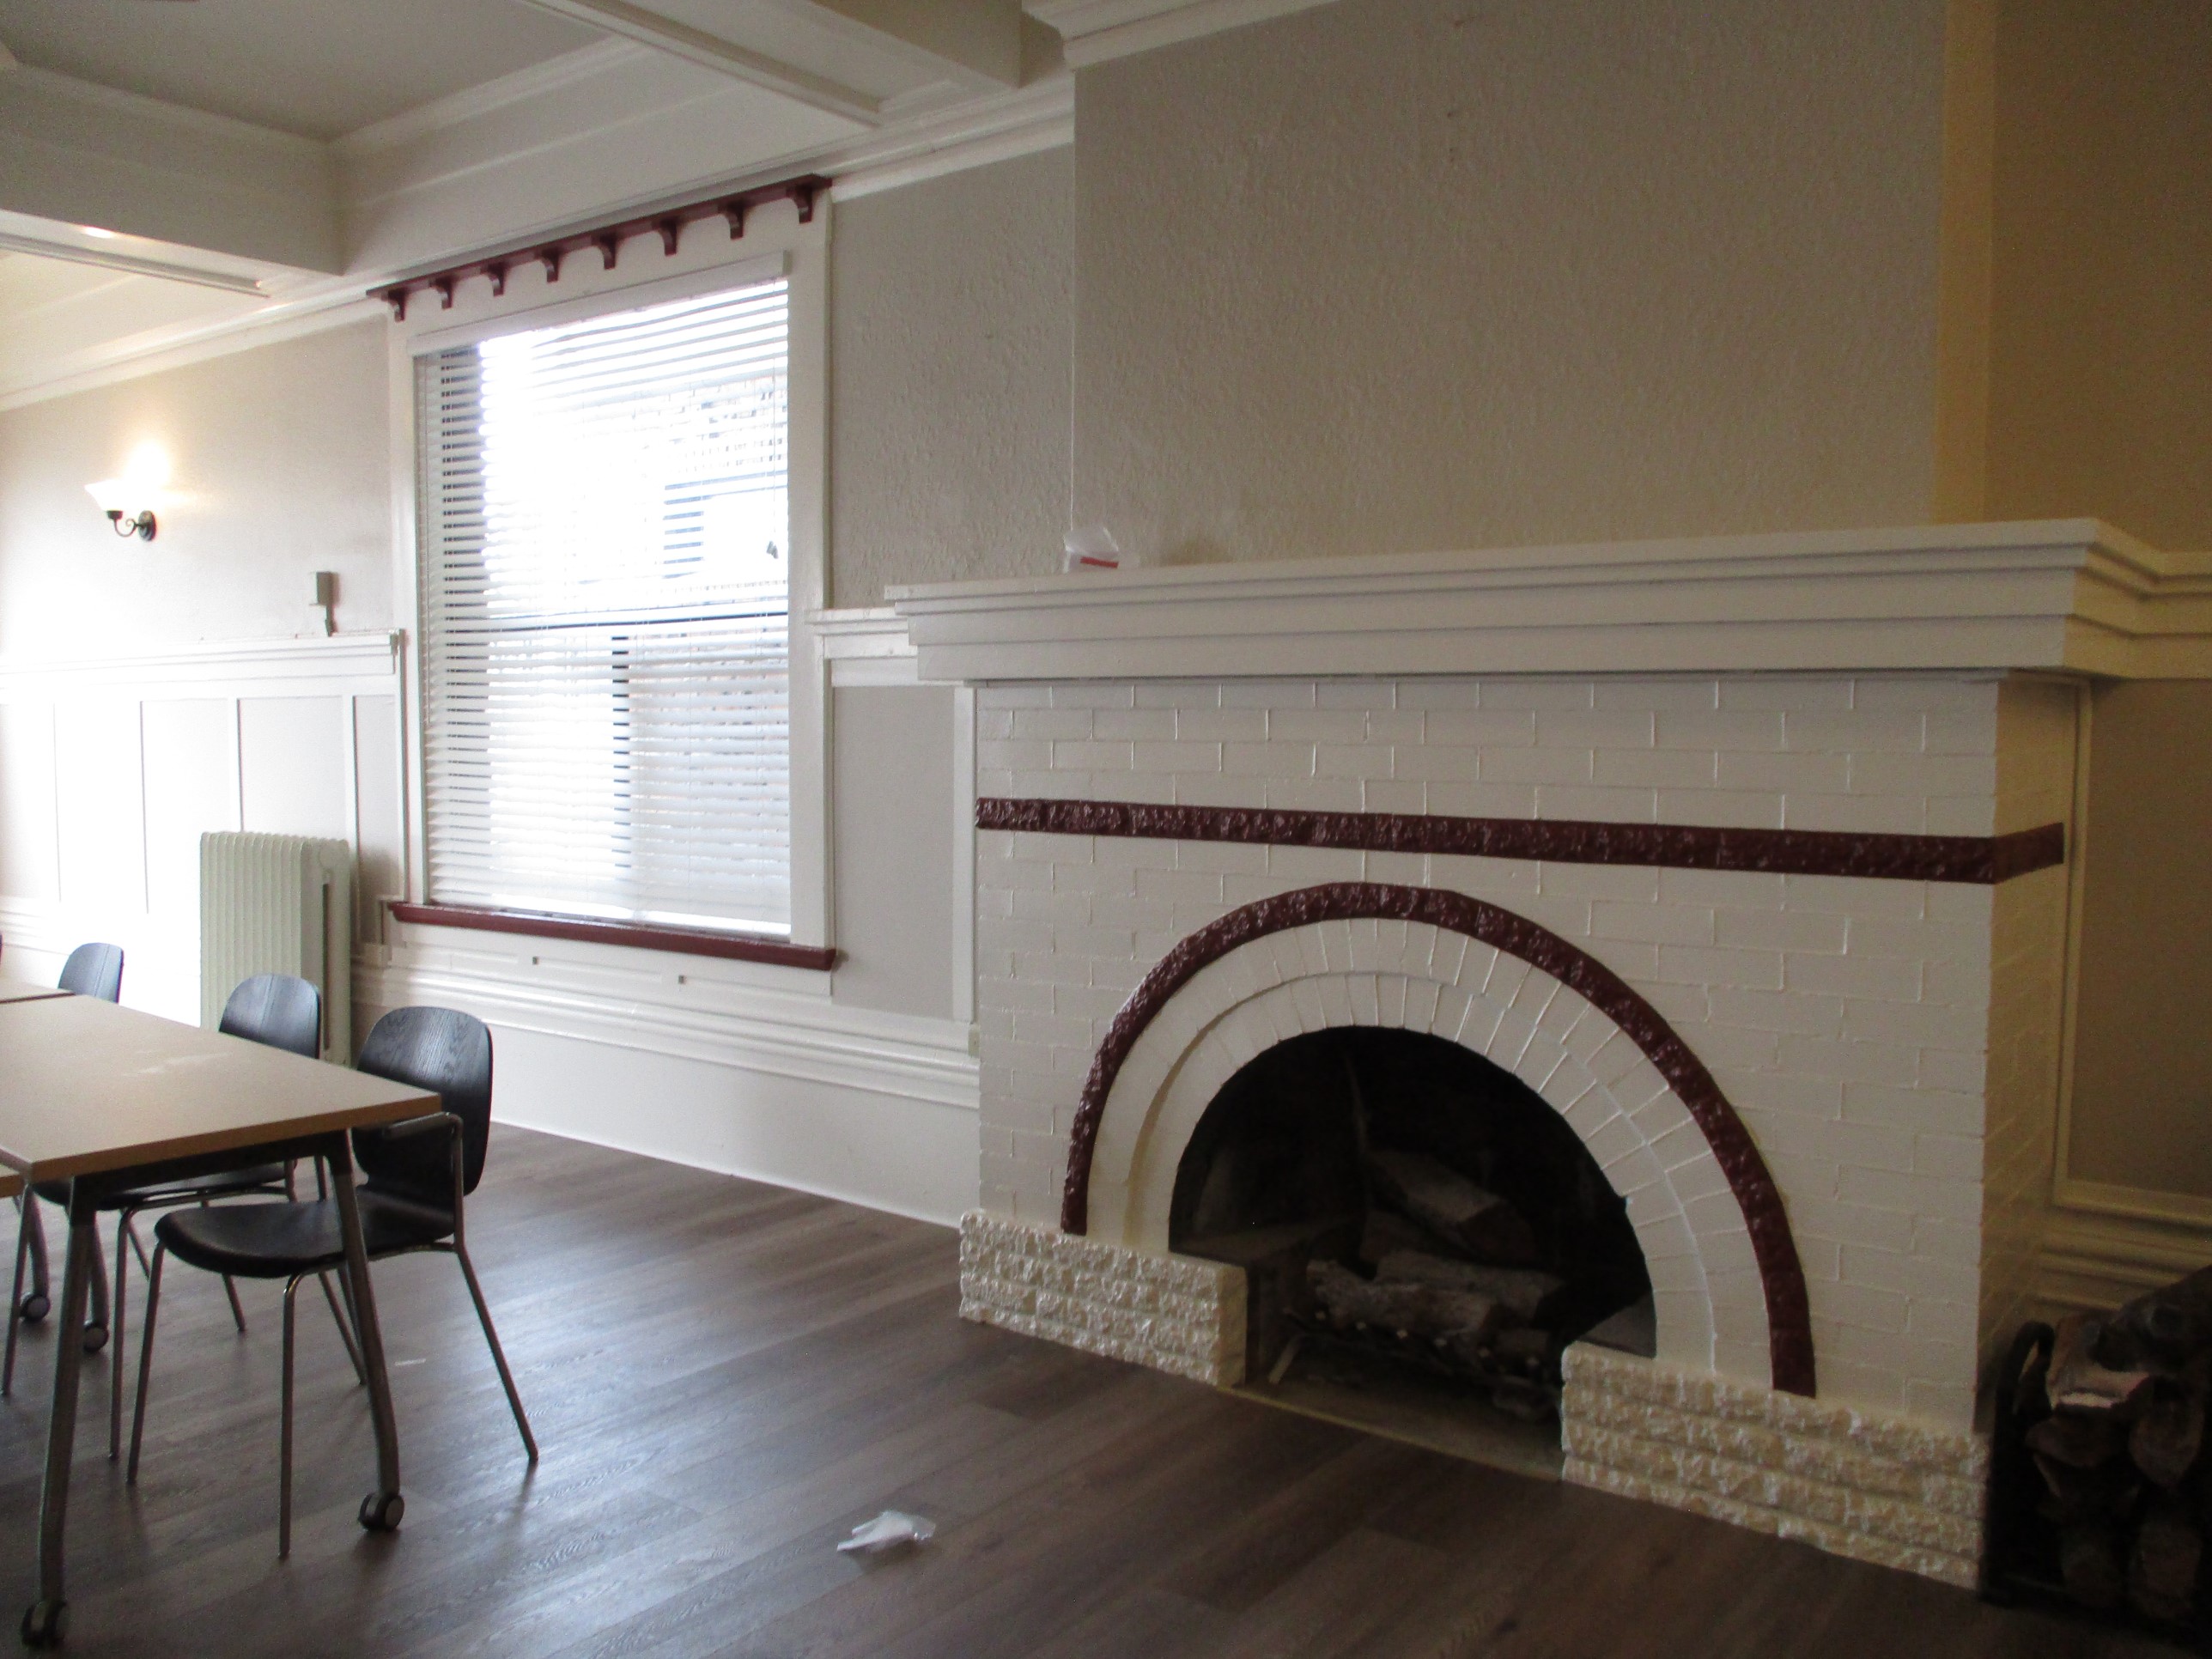 After Madison Park Apartments community room fireplace